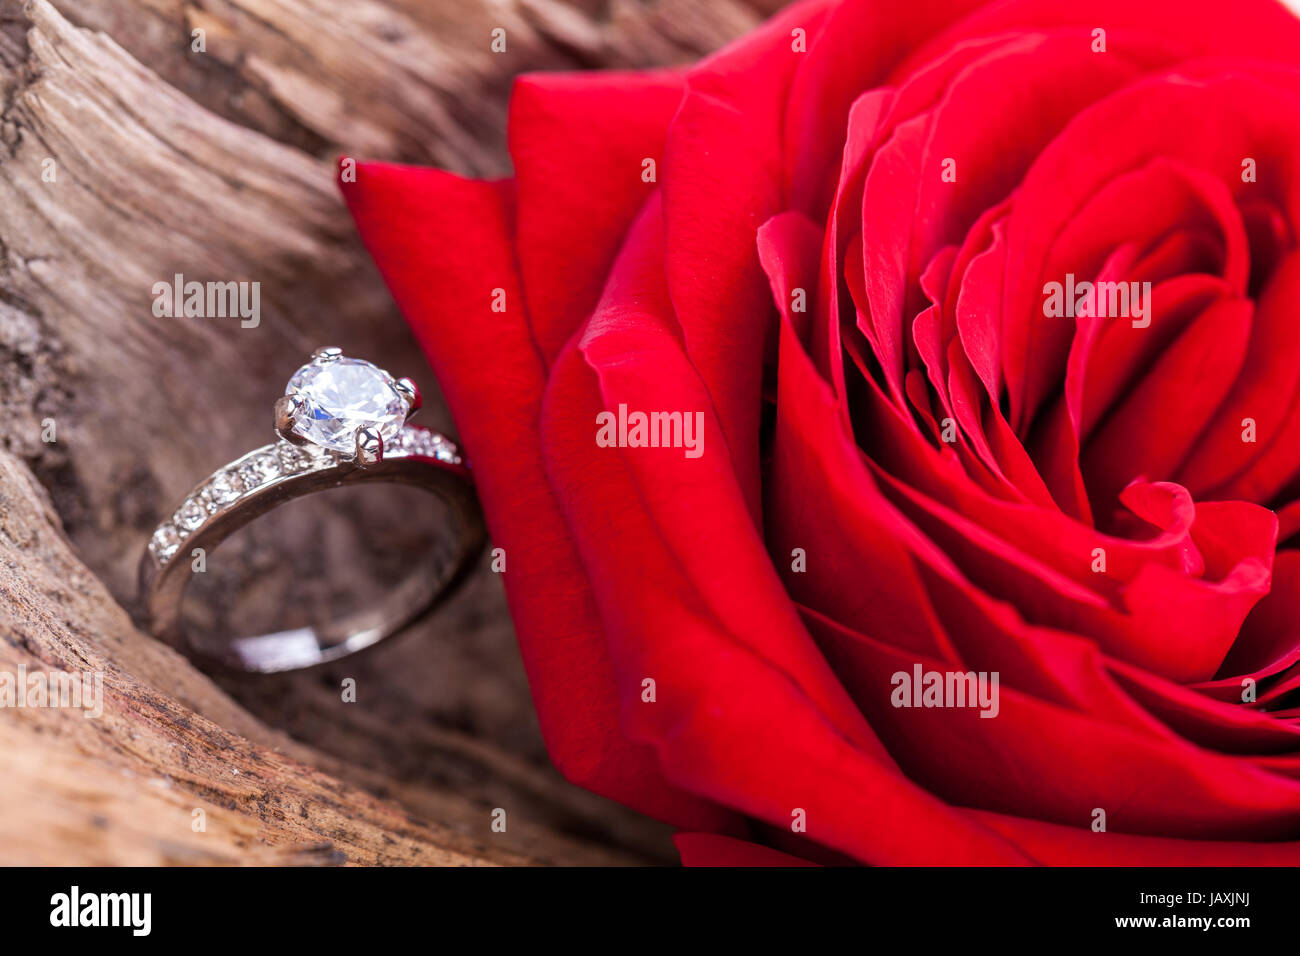 Lust Auf Liebe High Resolution Stock Photography and Images - Alamy